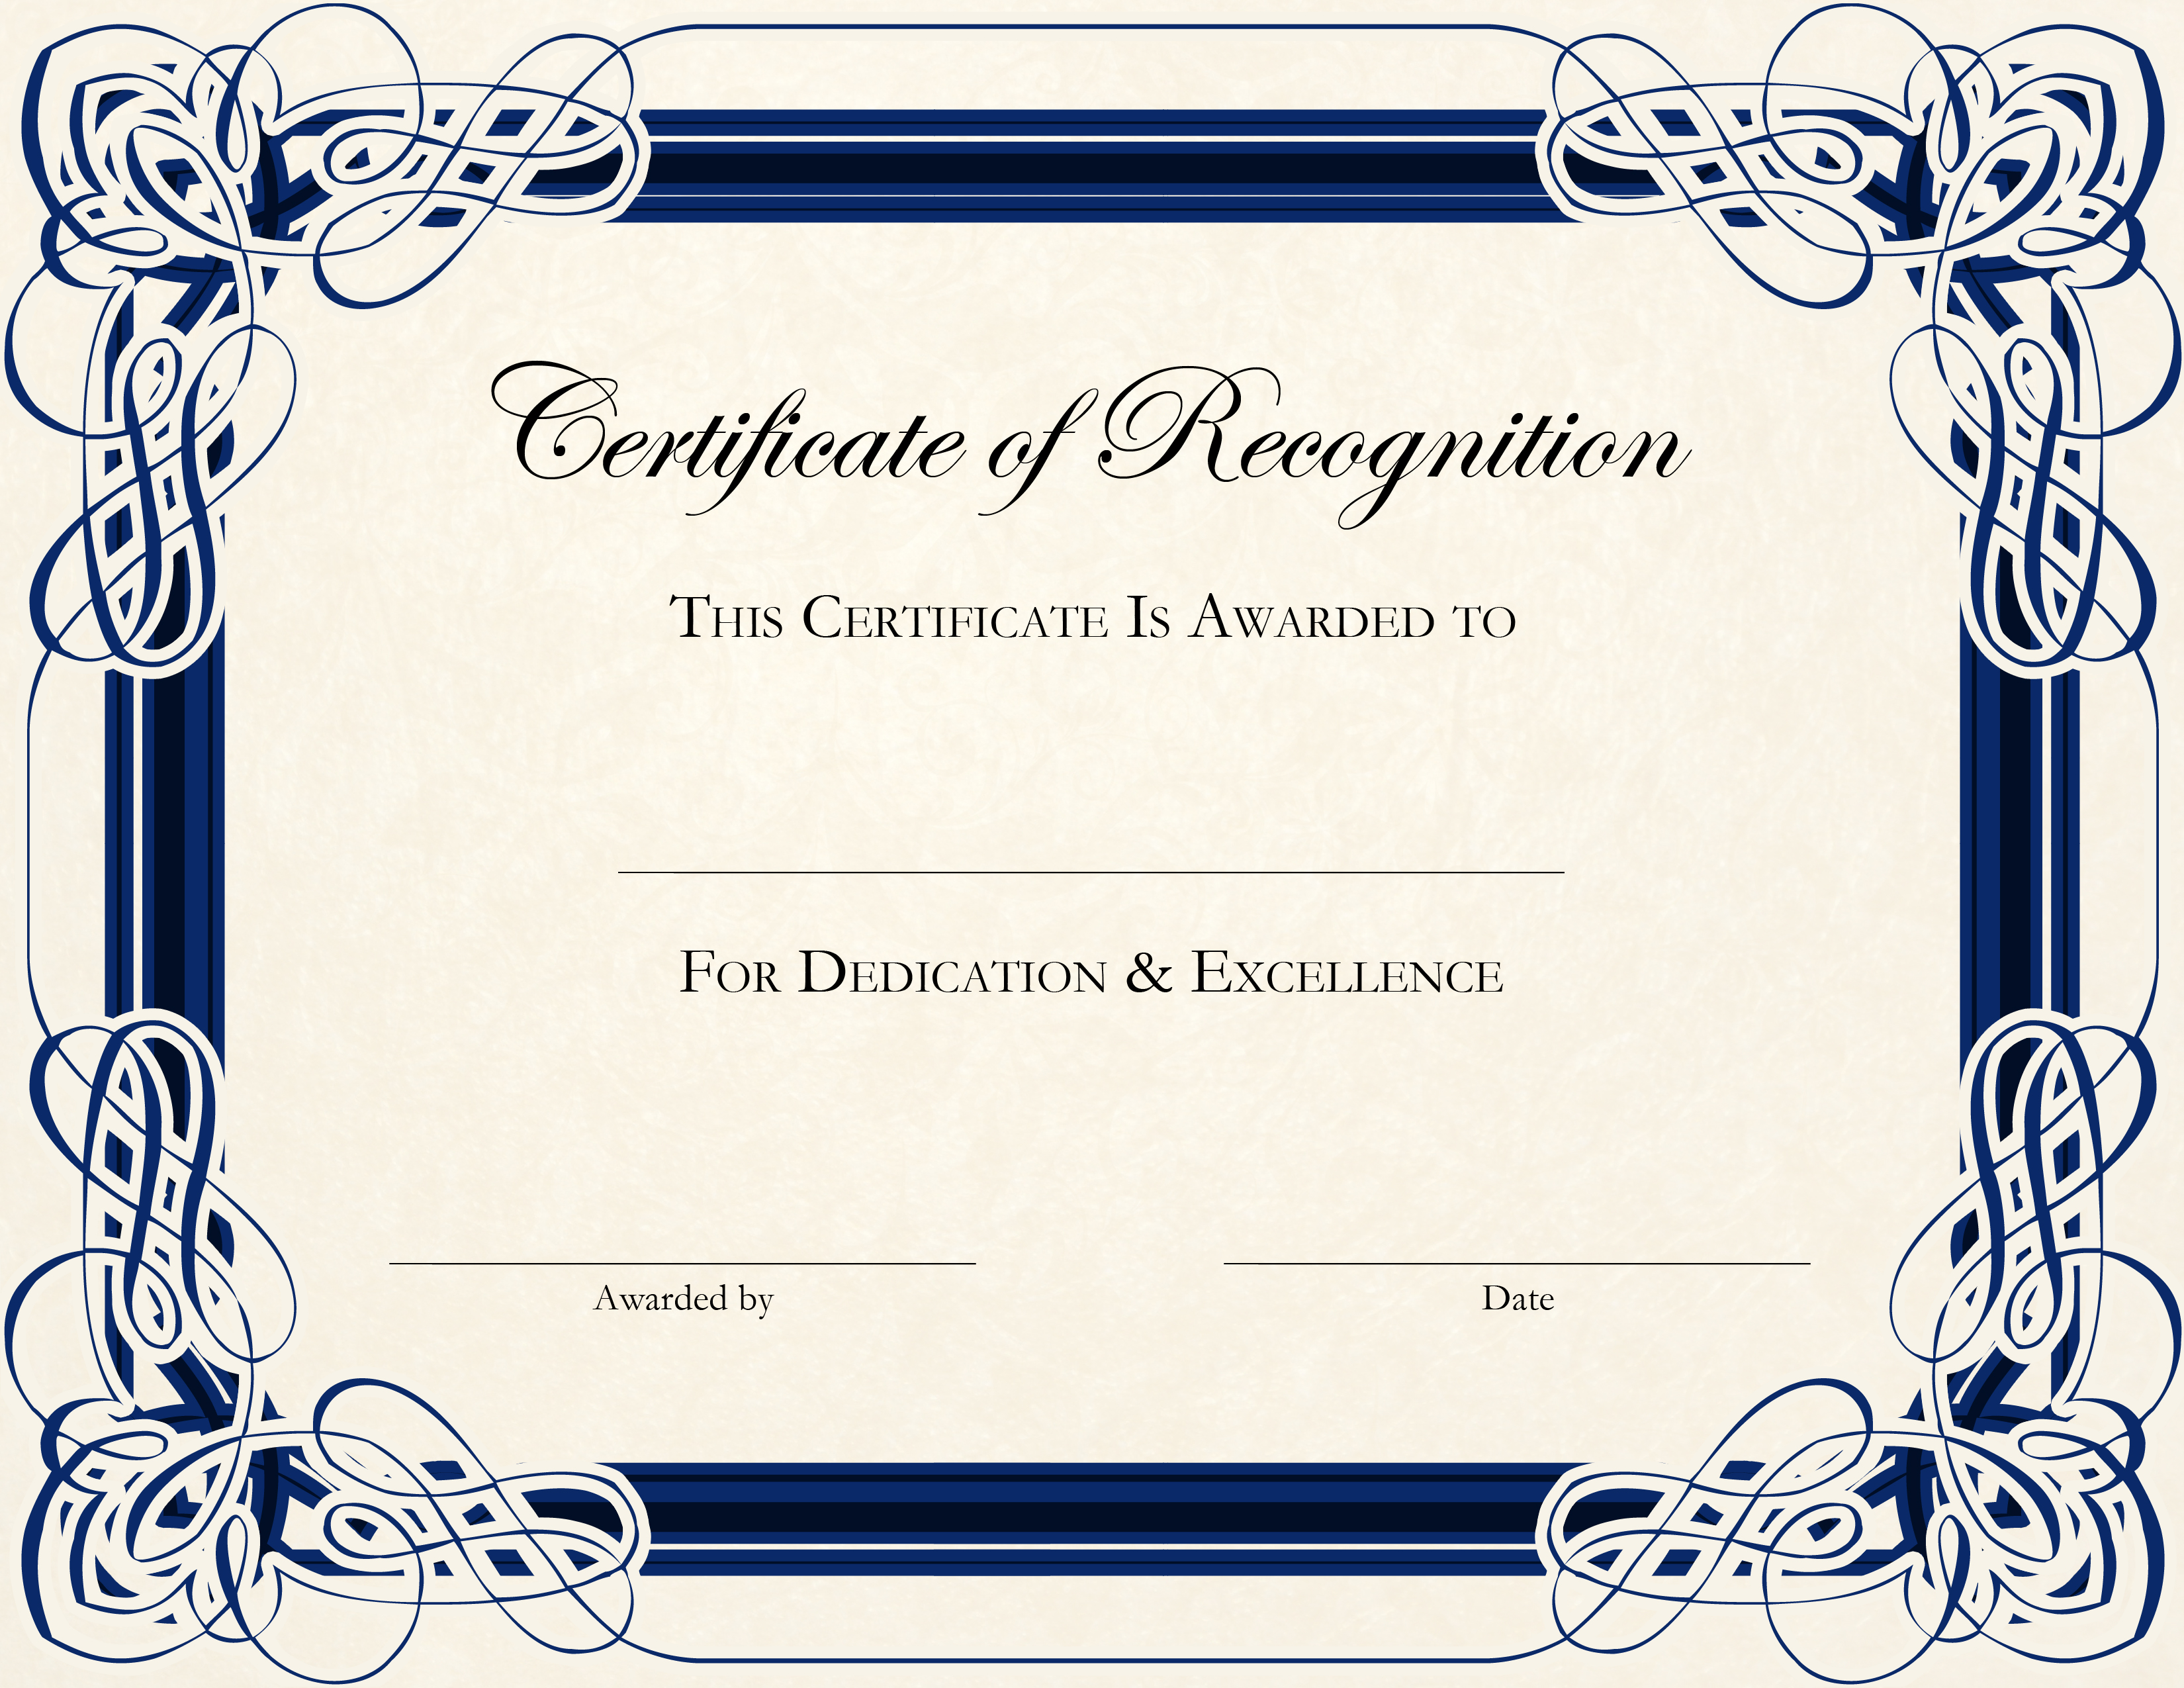 20 Editable Microsoft Certificate Templates Images - Free Editable Throughout Blank Award Certificate Templates Word